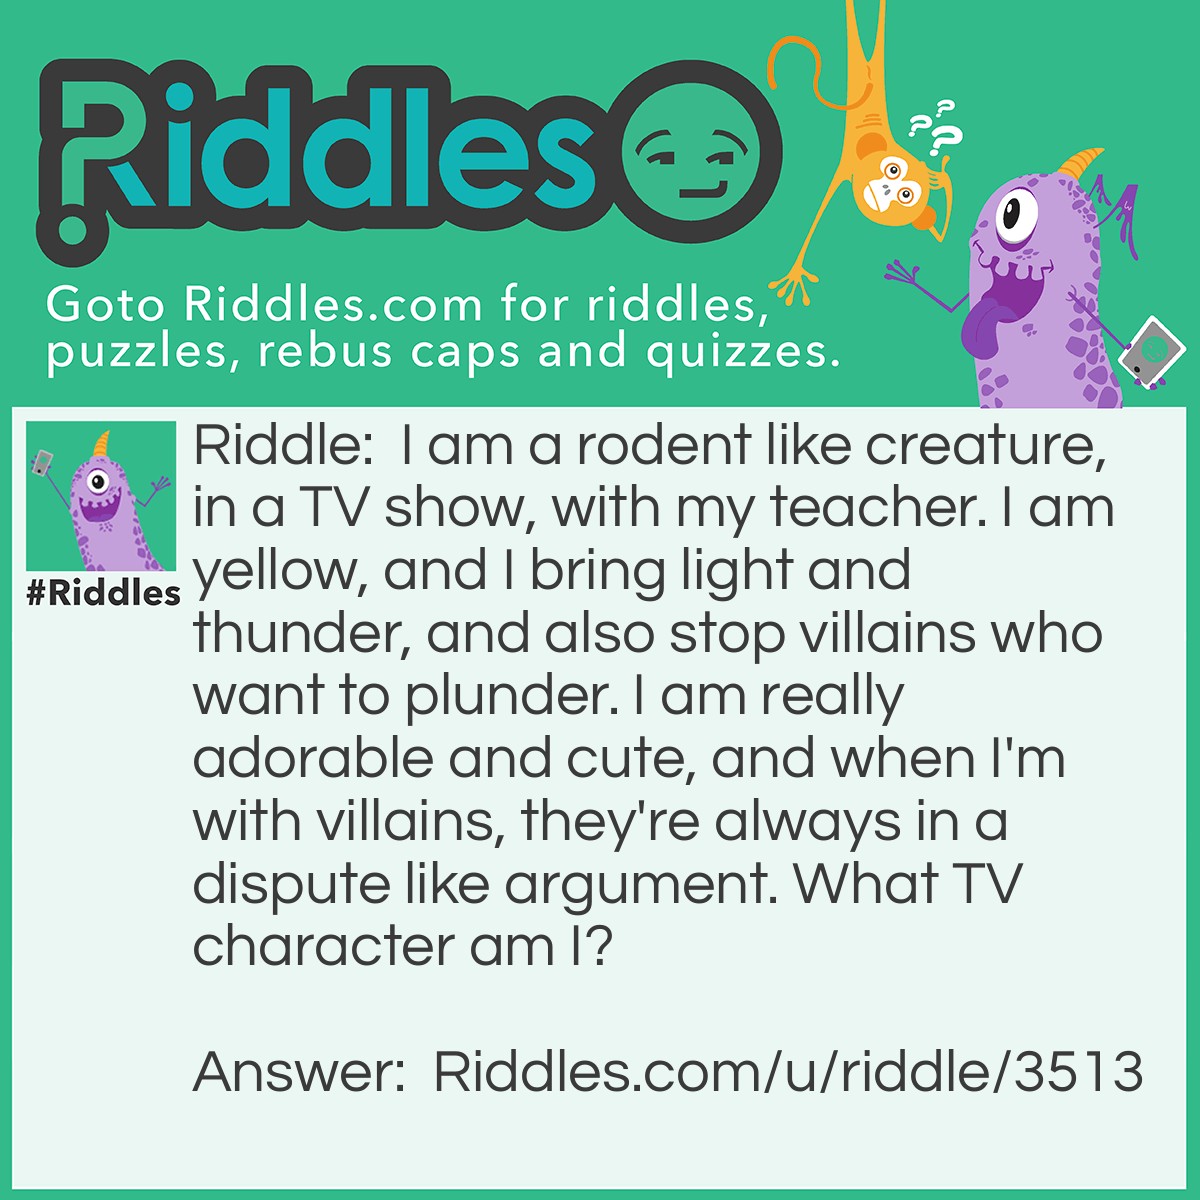 Riddle: I am a rodent like creature, in a TV show, with my teacher. I am yellow, and I bring light and thunder, and also stop villains who want to plunder. I am really adorable and cute, and when I'm with villains, they're always in a dispute like argument. What TV character am I? Answer: Pikachu!